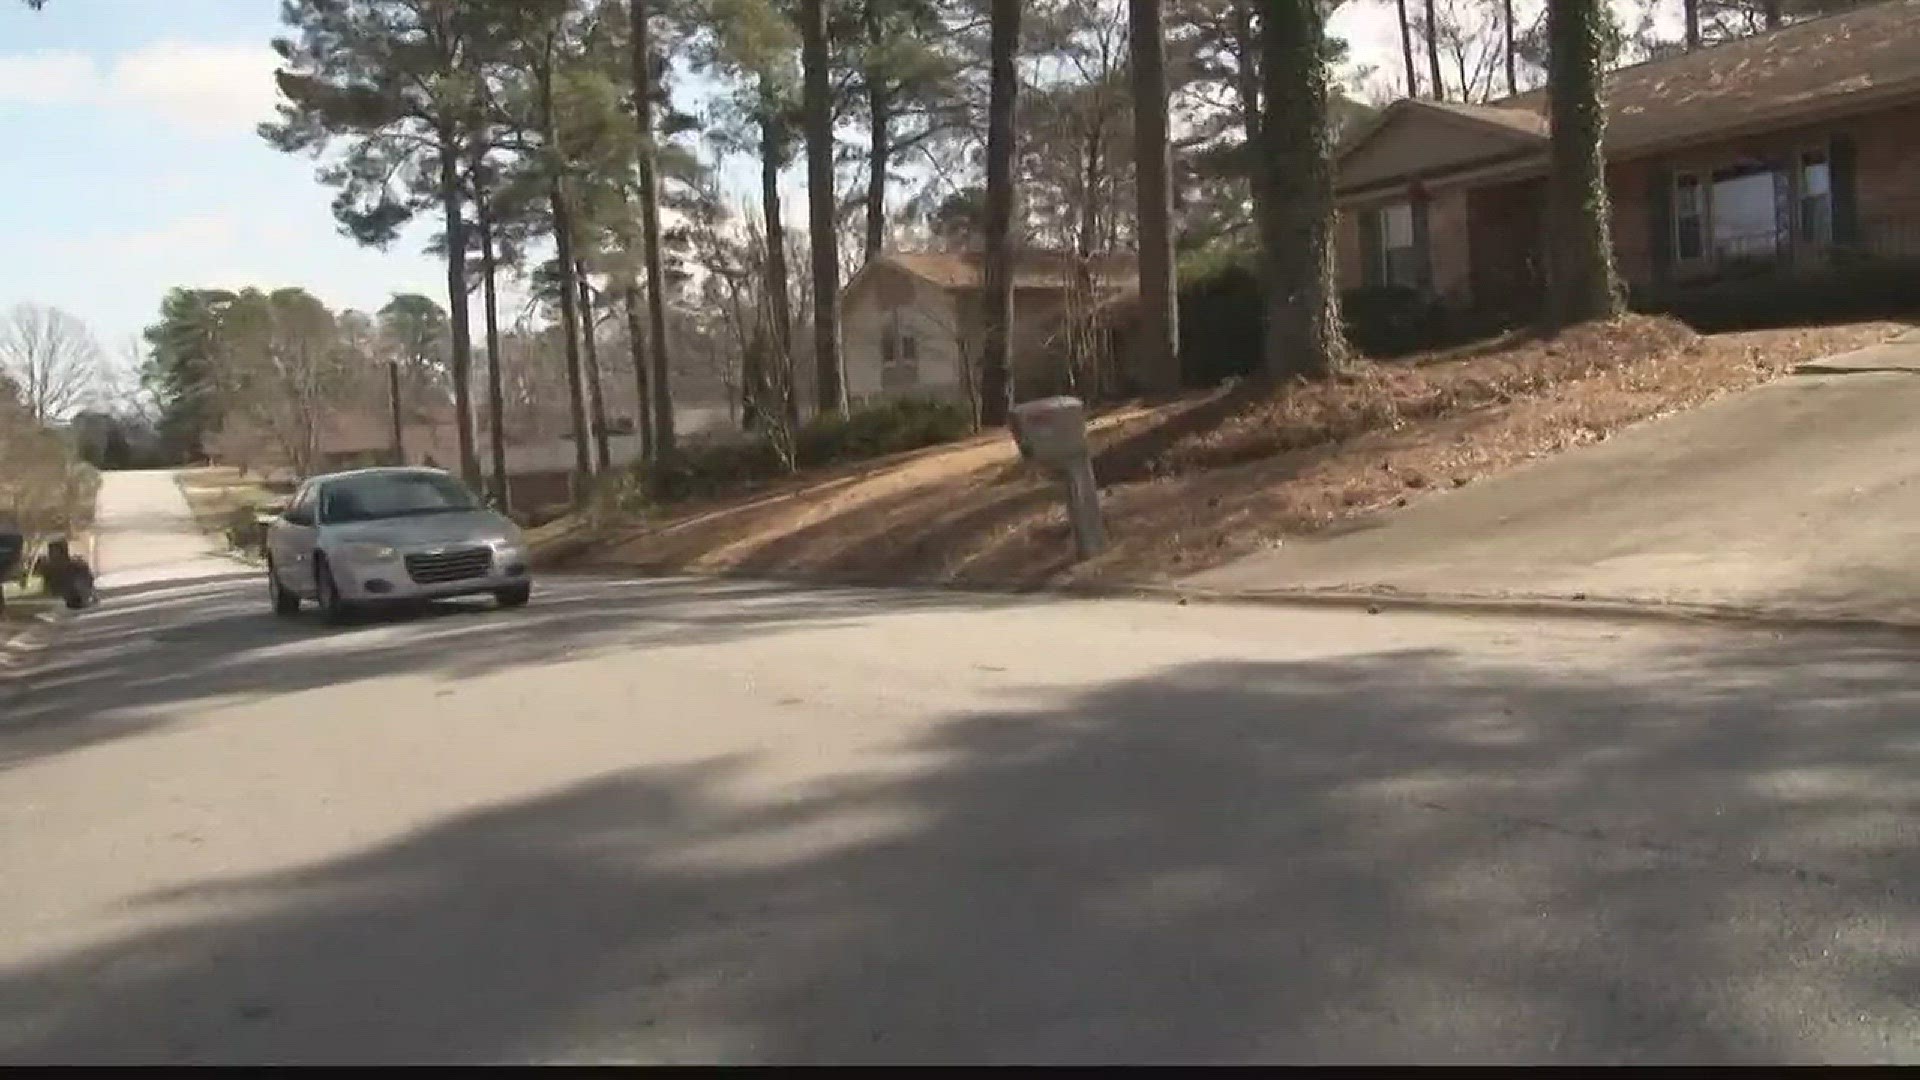 Westover Arches residents have faced a slew of car break-ins over the past few weeks.